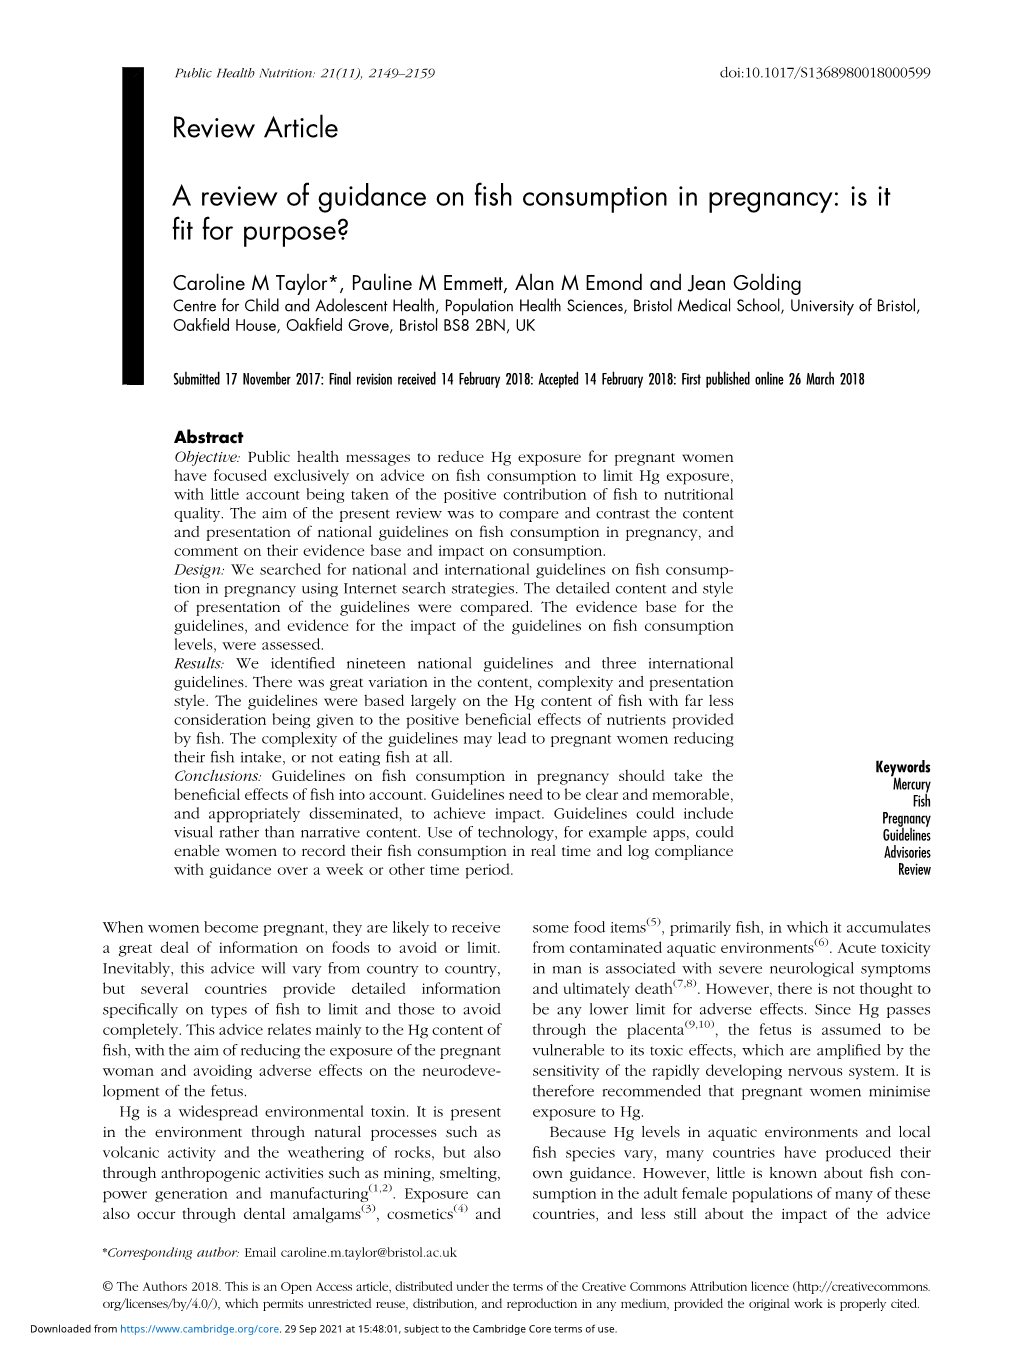 Review Article a Review of Guidance on Fish Consumption in Pregnancy